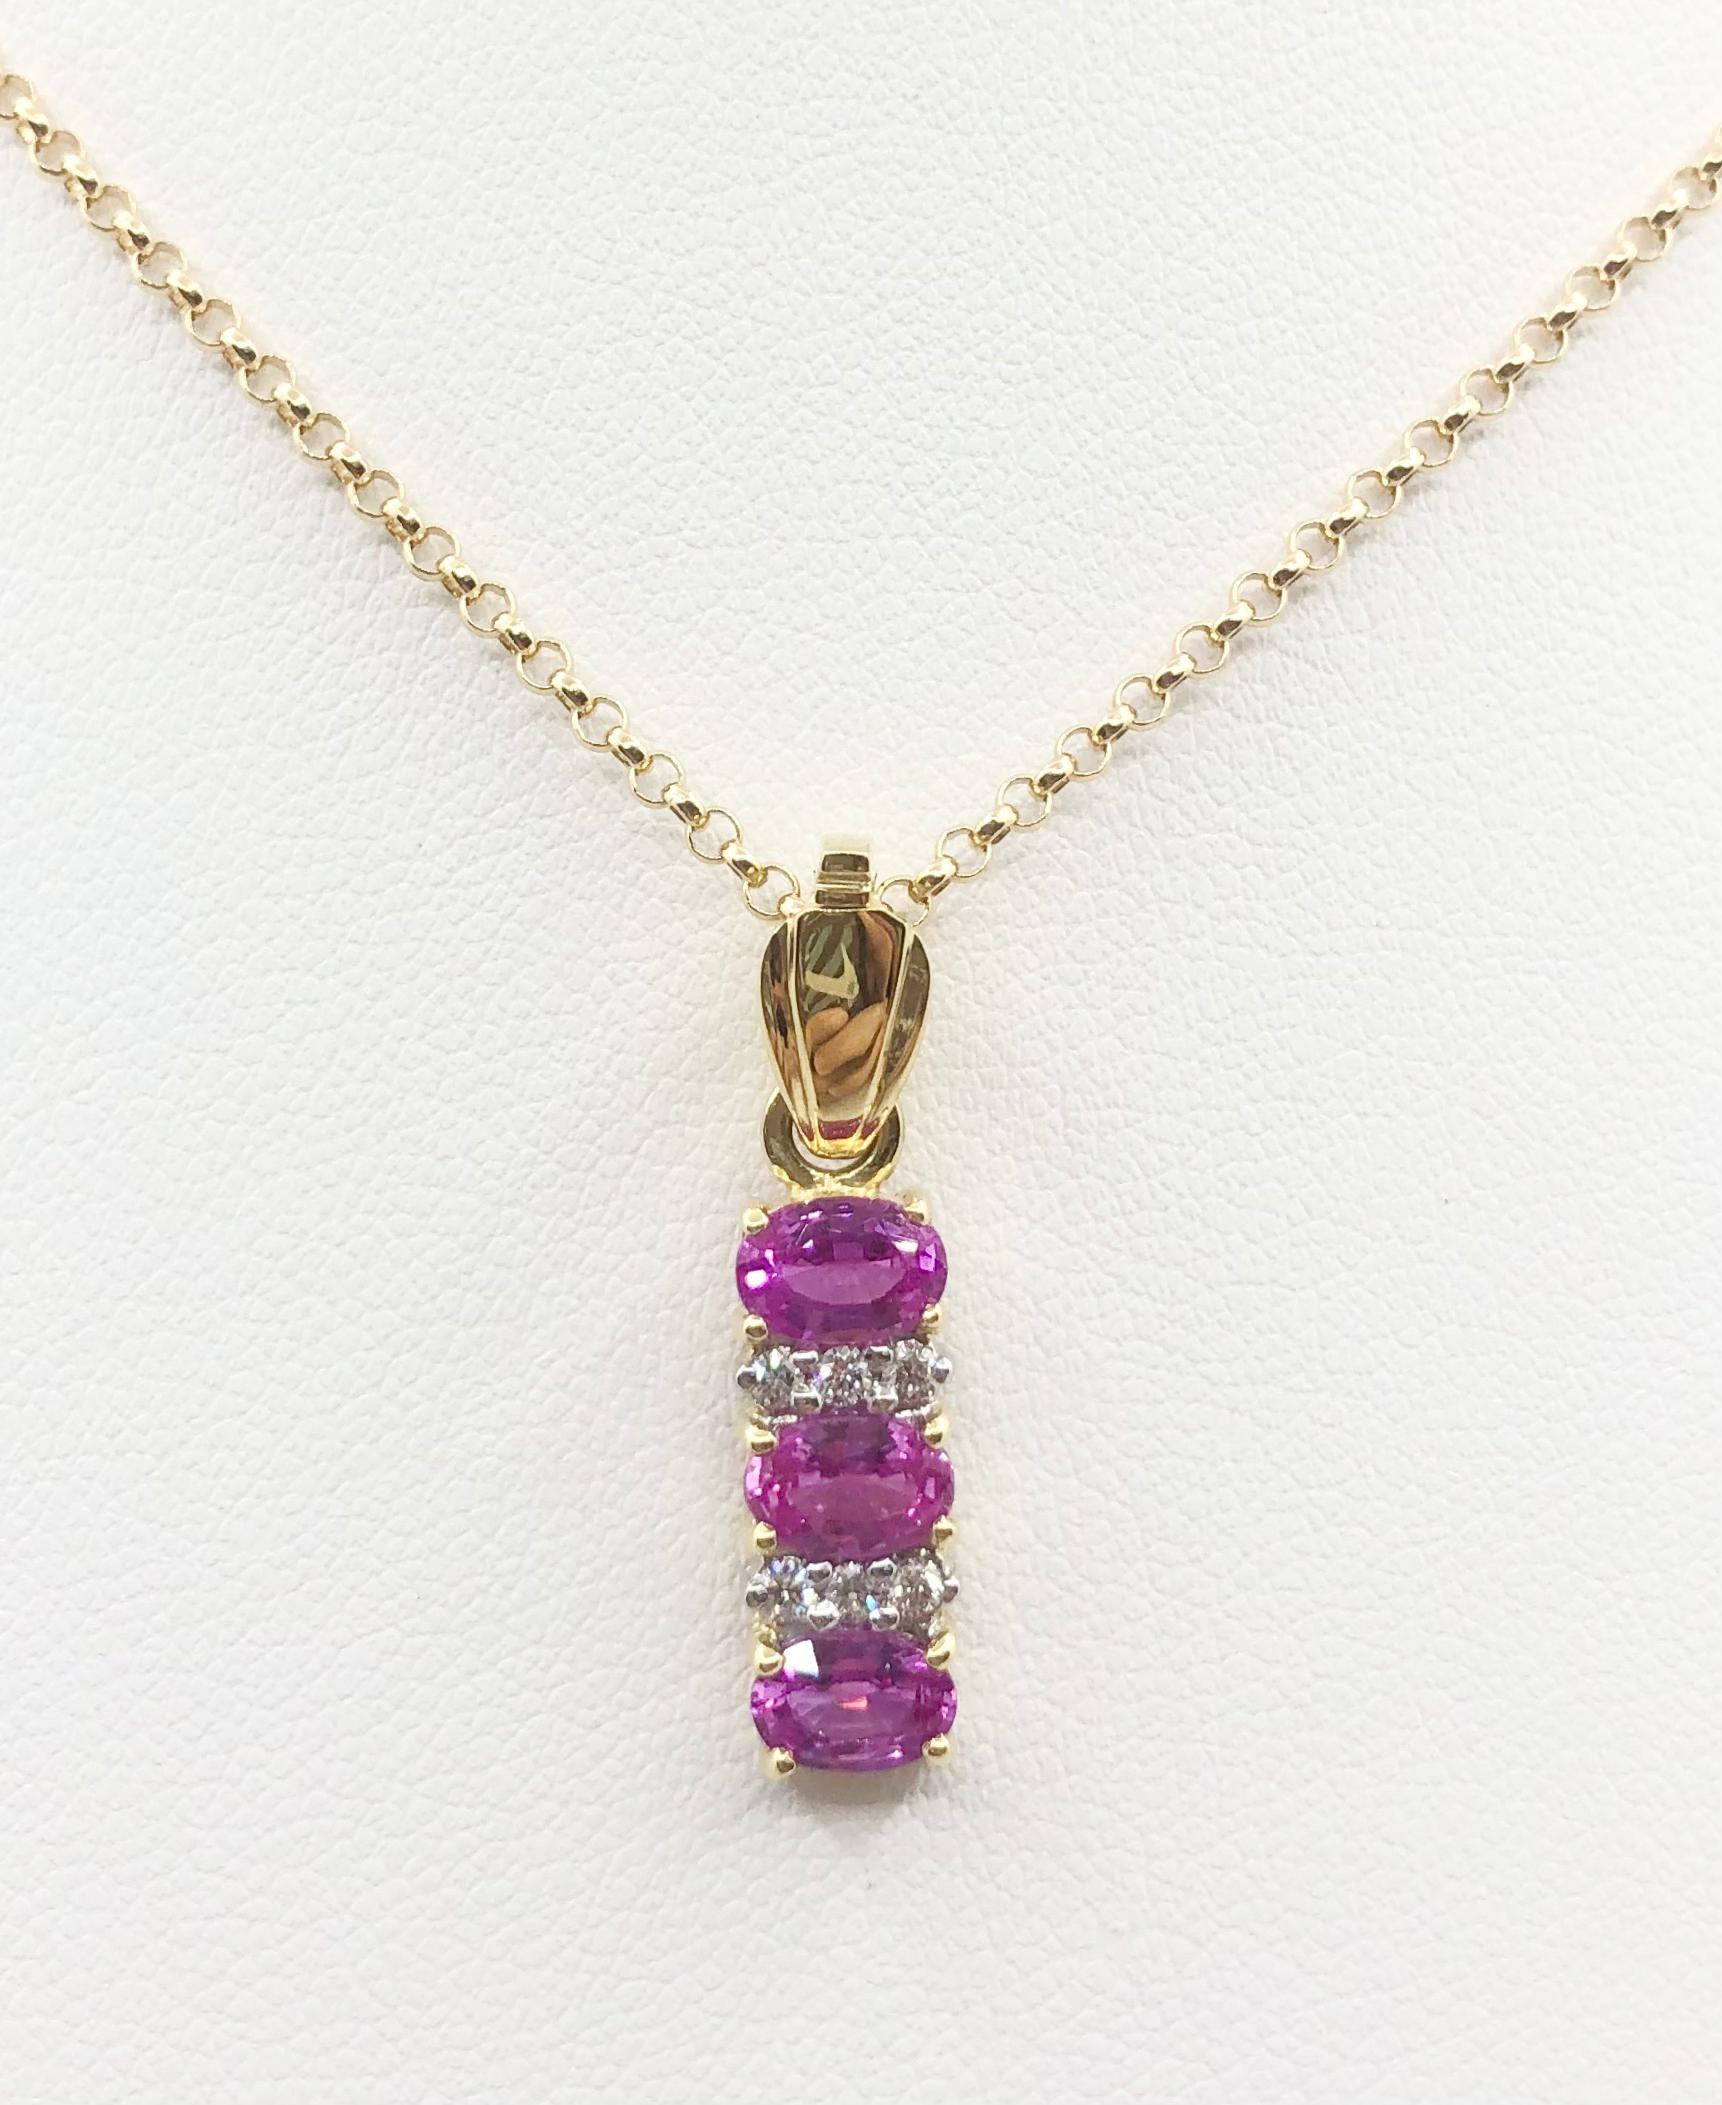 Pink Sapphire 1.70 carats with Diamond 0.11 carat Pendant set in 18 Karat Gold Settings
(chain not included)

Width: 0.6 cm 
Length: 2.6 cm
Total Weight: 3.49 grams

